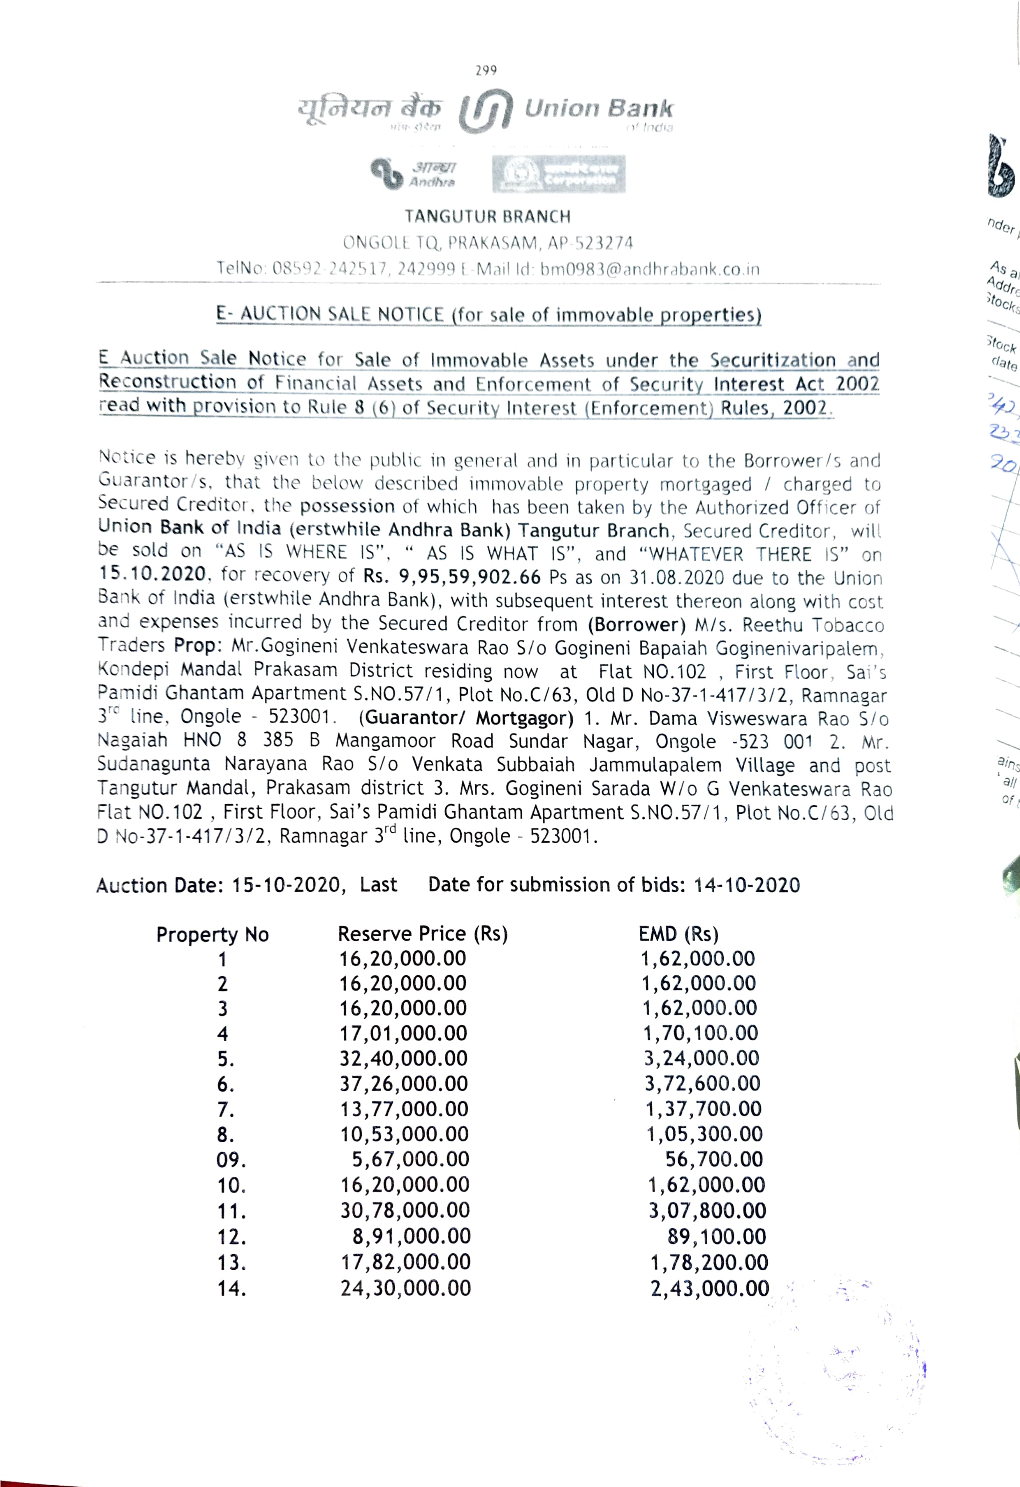 Andhr E-AUCTION SALE NOTICE (For Sale of Immovable Properties)